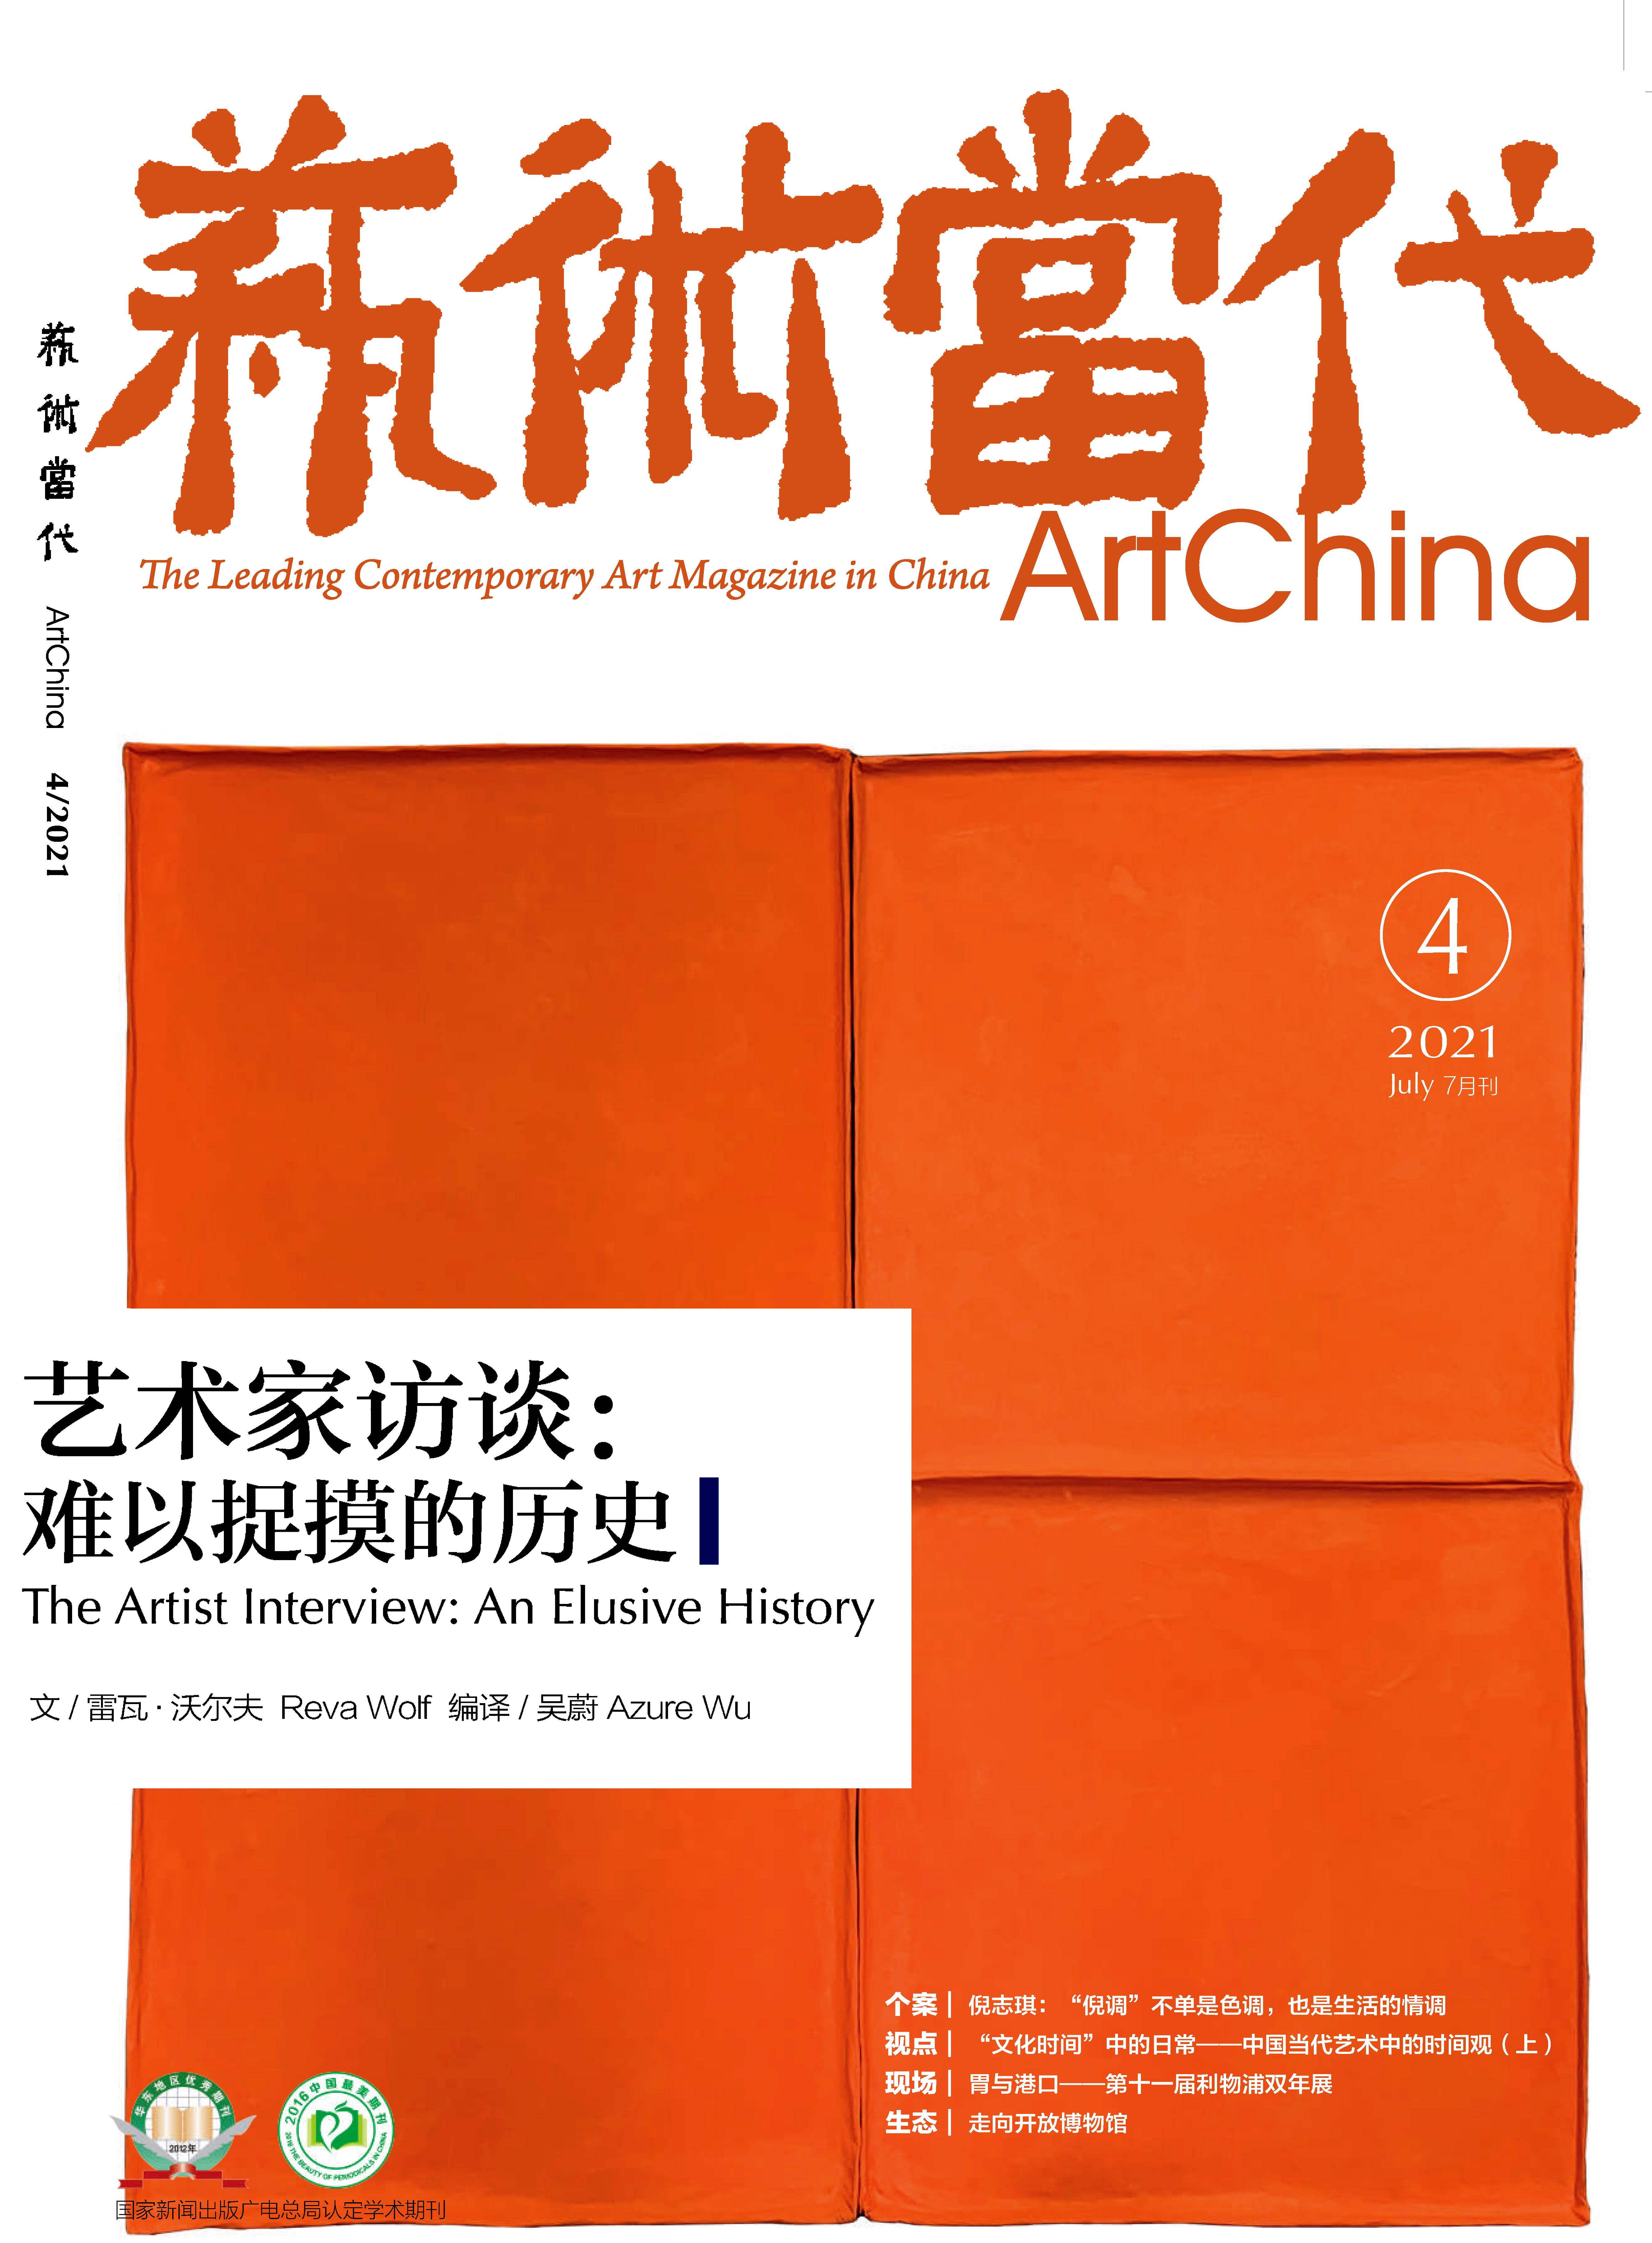 ArtChina, with inset of article by Reva Wolf, titled, The Artist Interview: An Elusive History